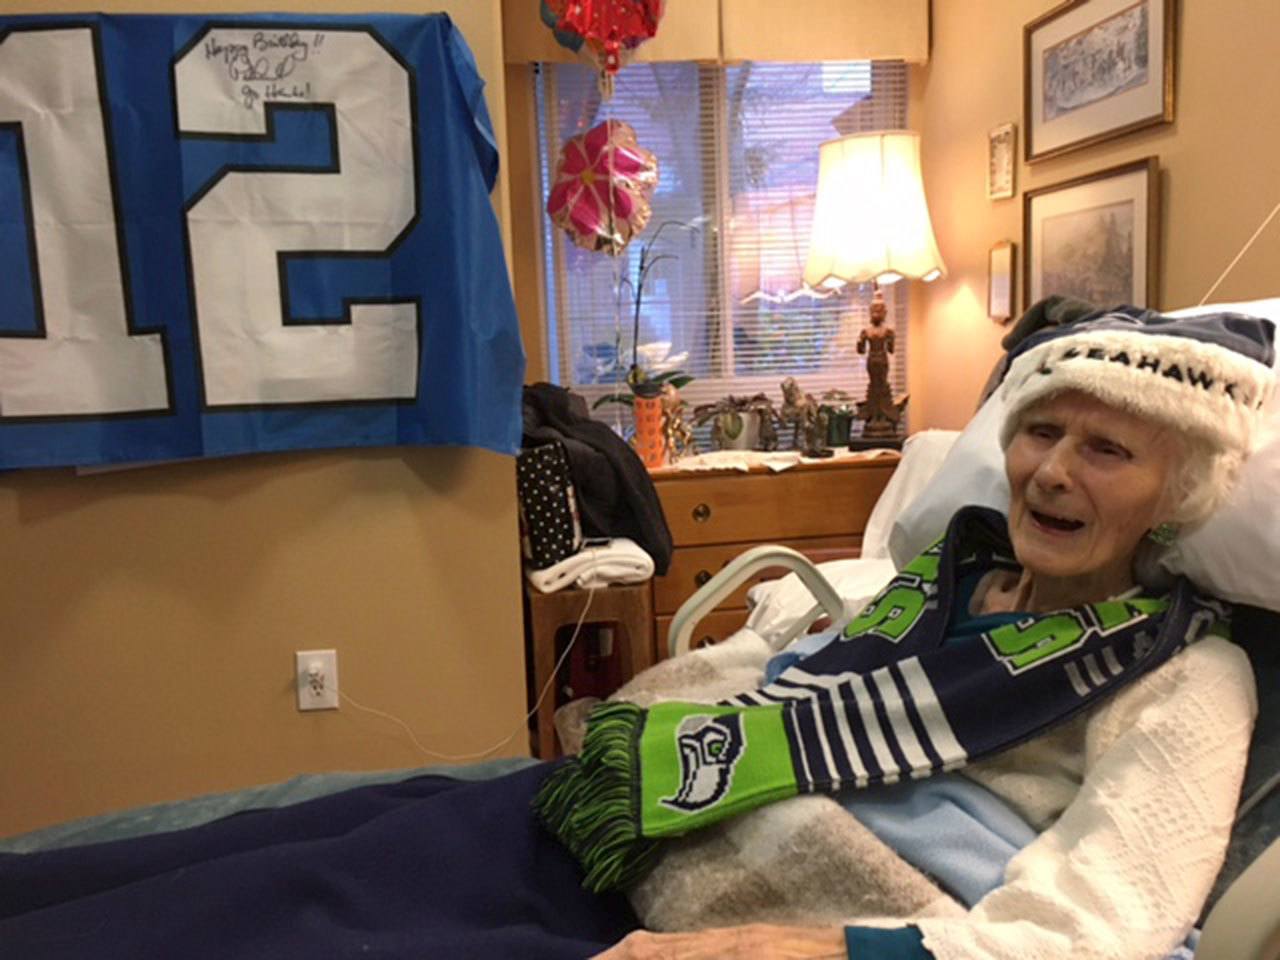 100-year-old Lois Lawson got a signed Seahawks flag for her birthday. Photos courtesy of Greg Asimakoupoulos